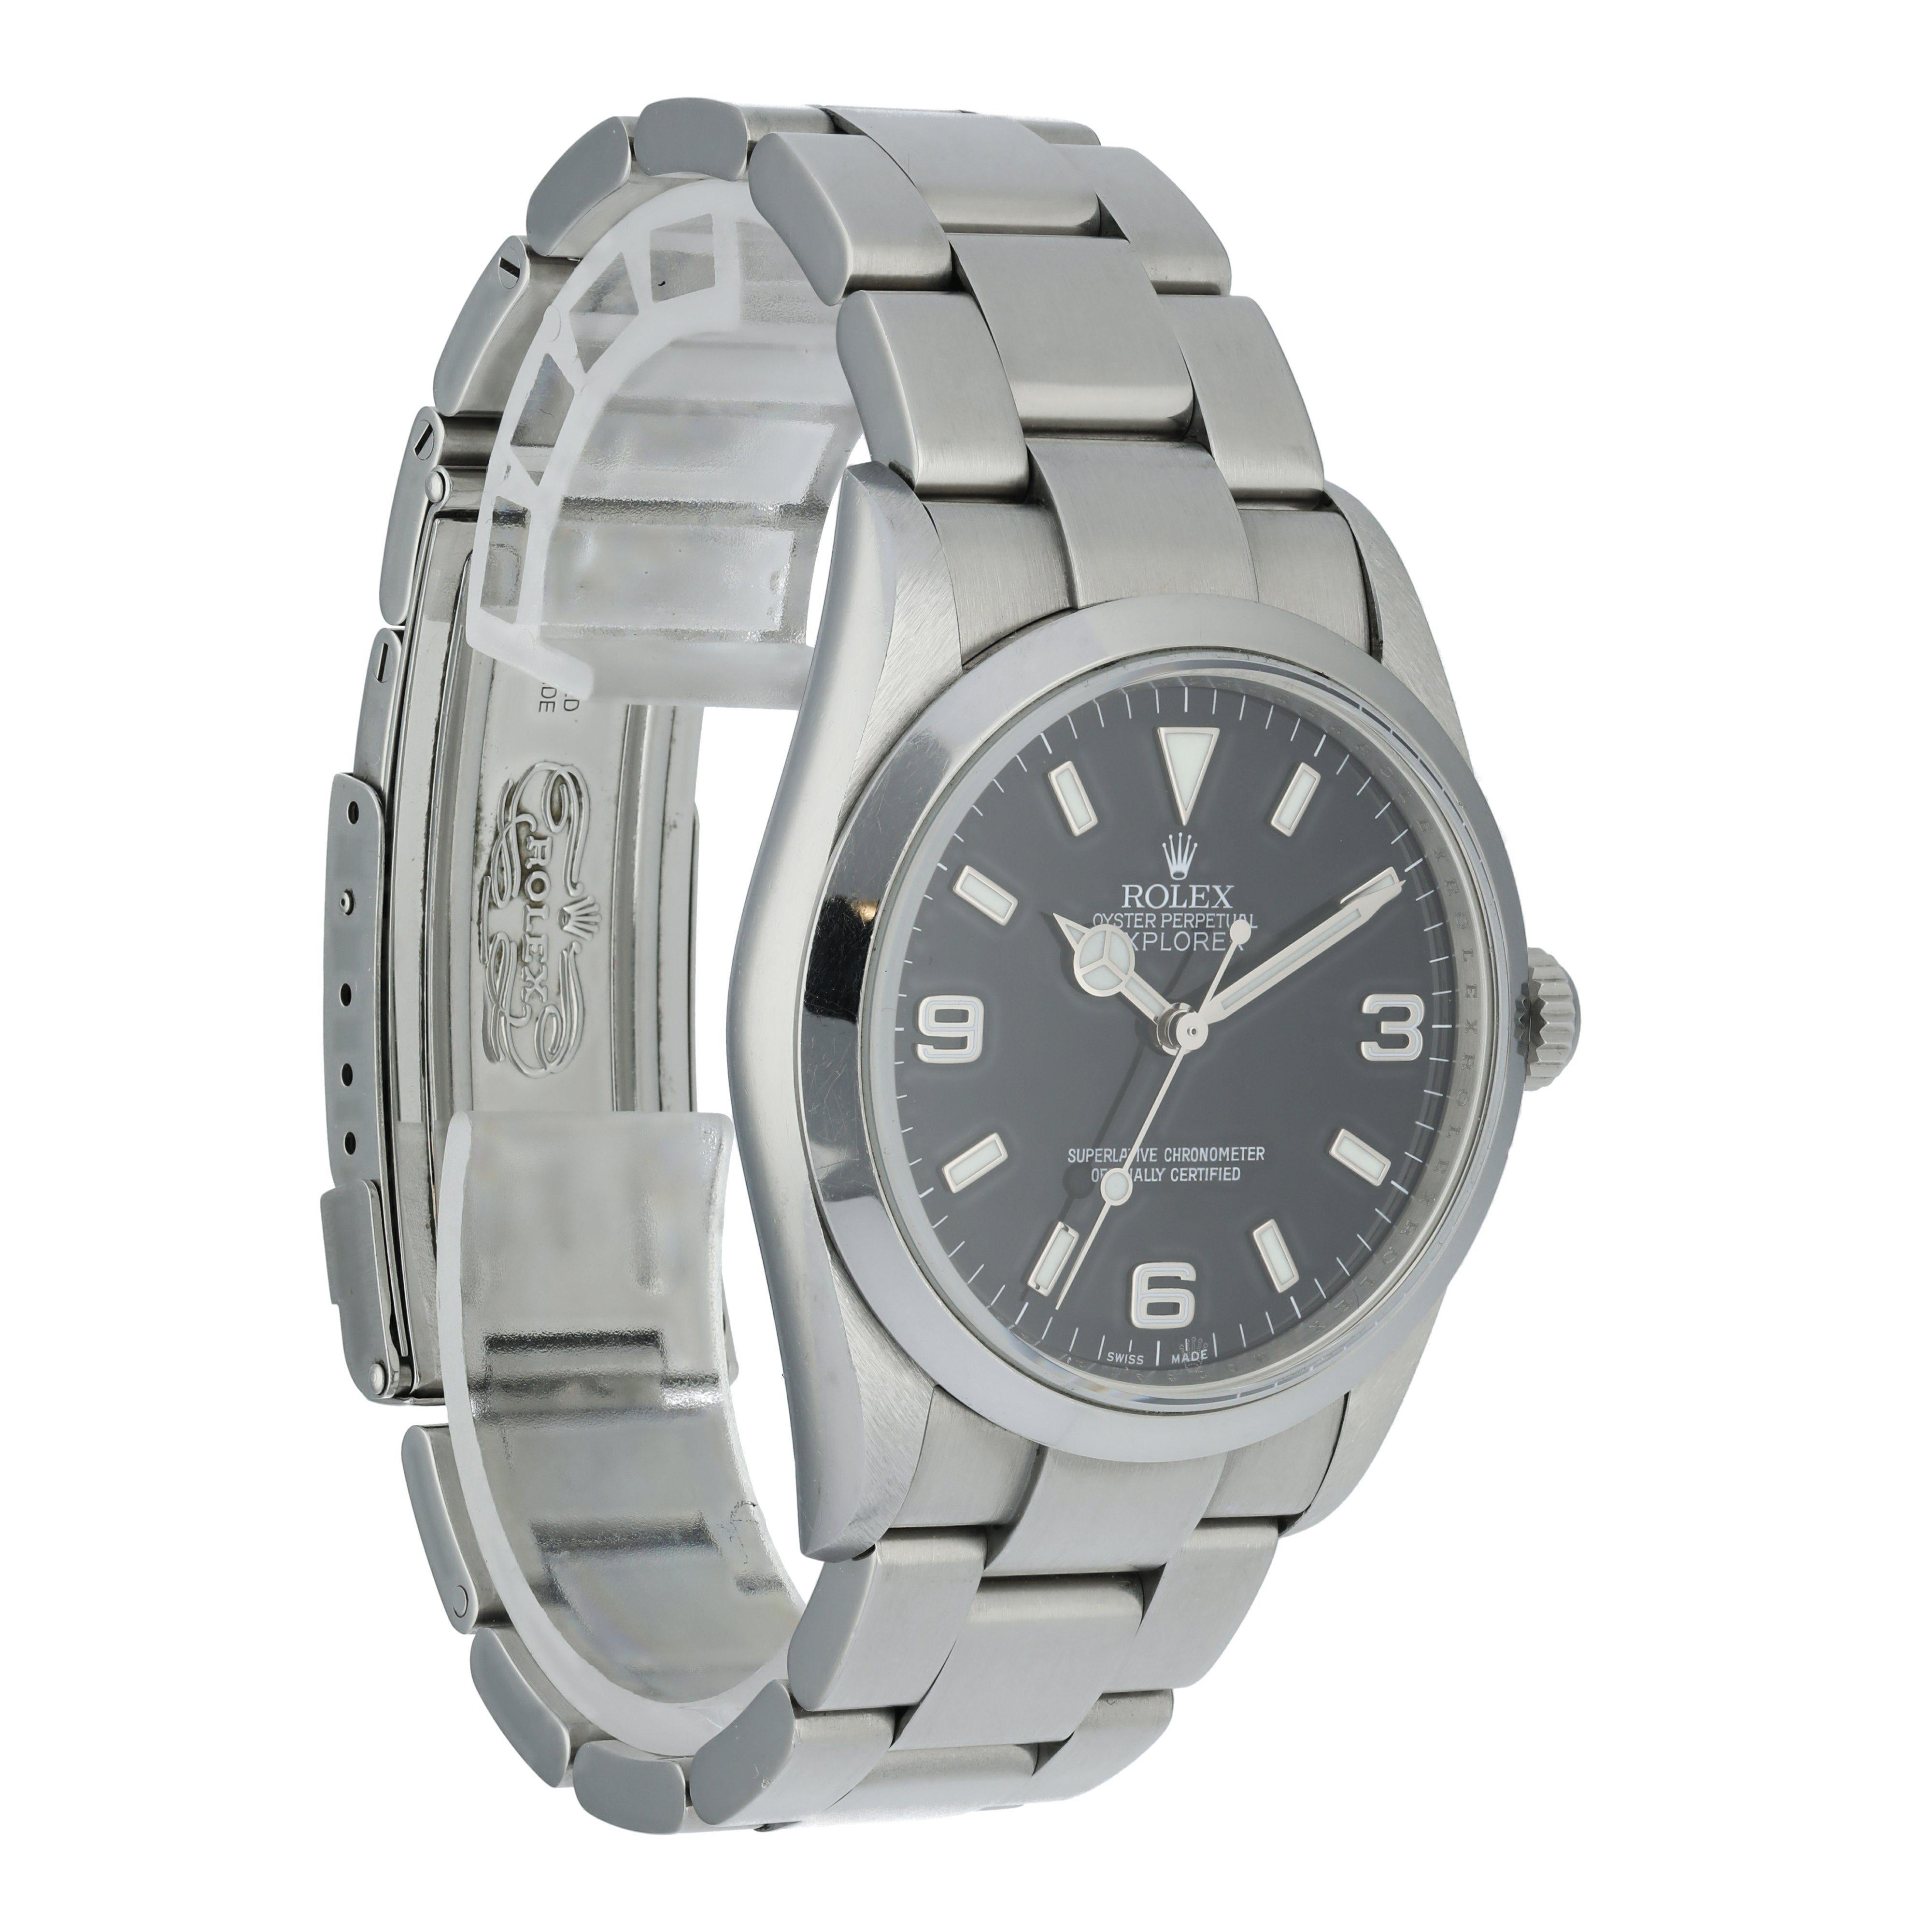 Rolex Explorer 114270 Men's Watch In Excellent Condition For Sale In New York, NY